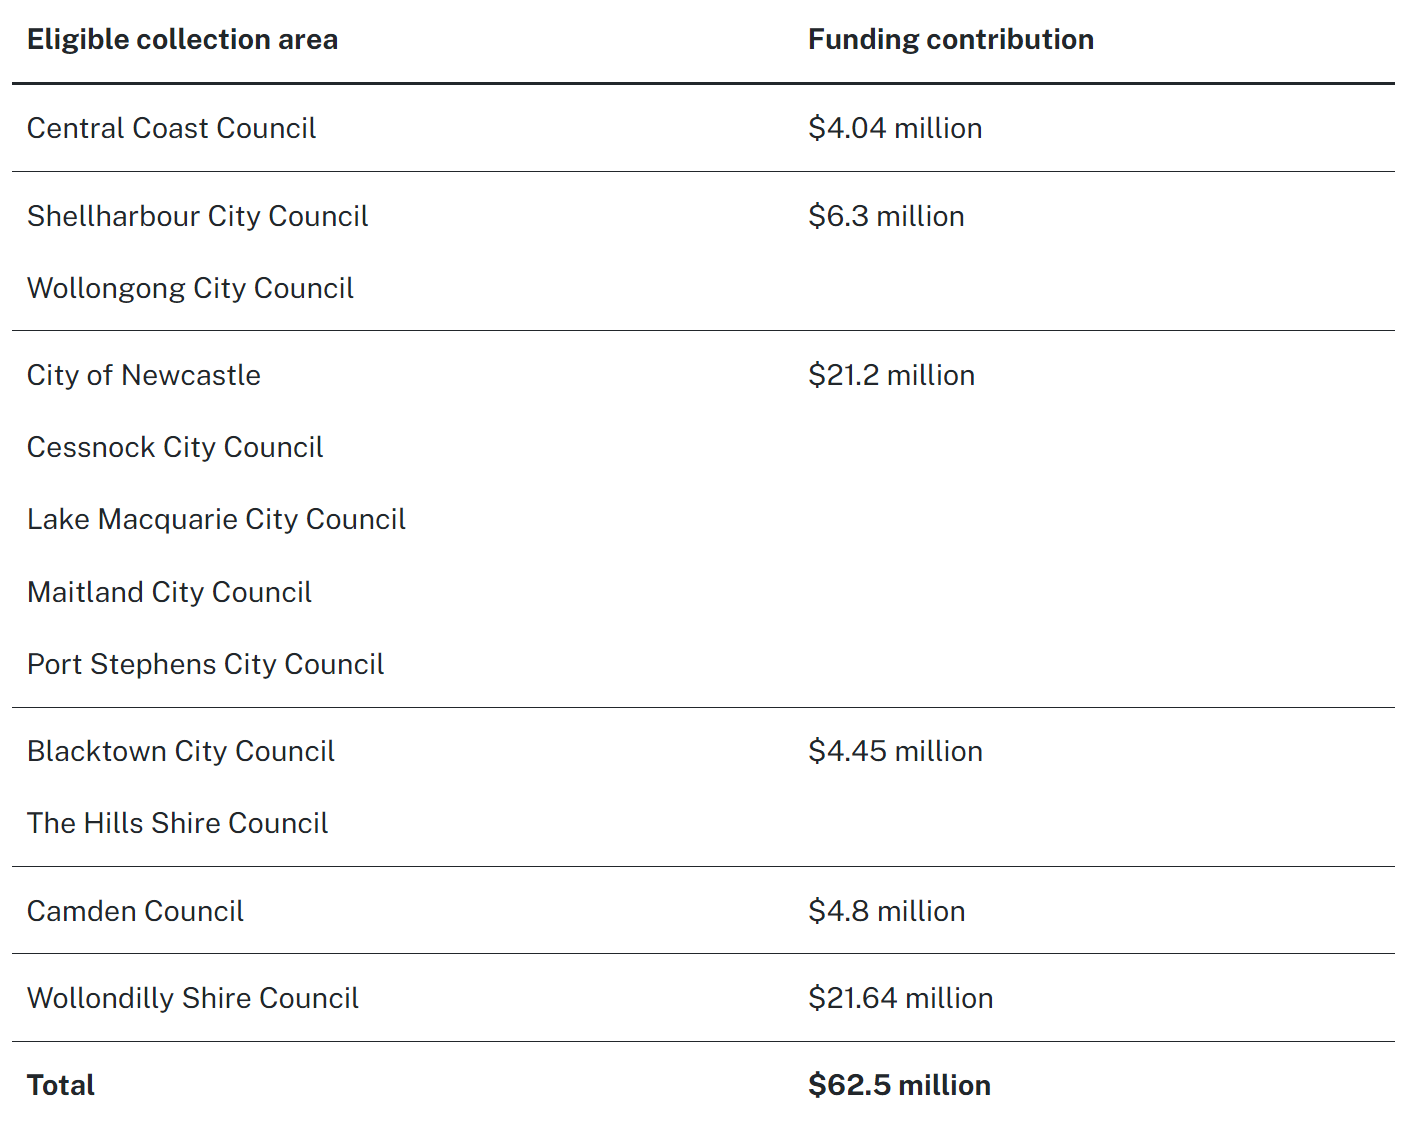 12 eligible local government areas and funding contributions in NSW